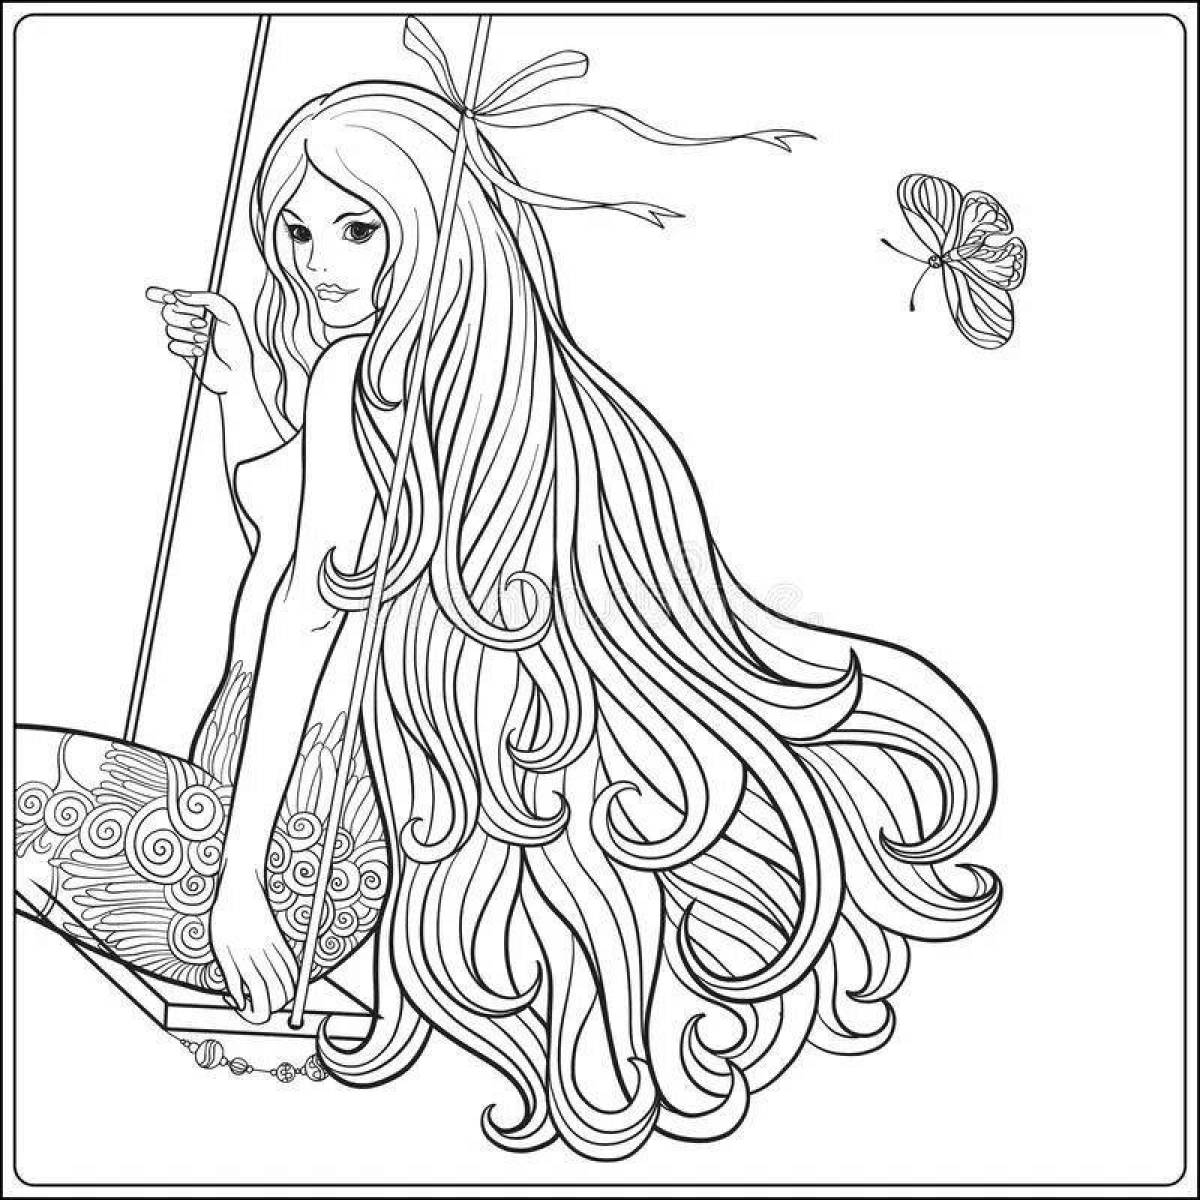 Playful coloring of a girl with long hair